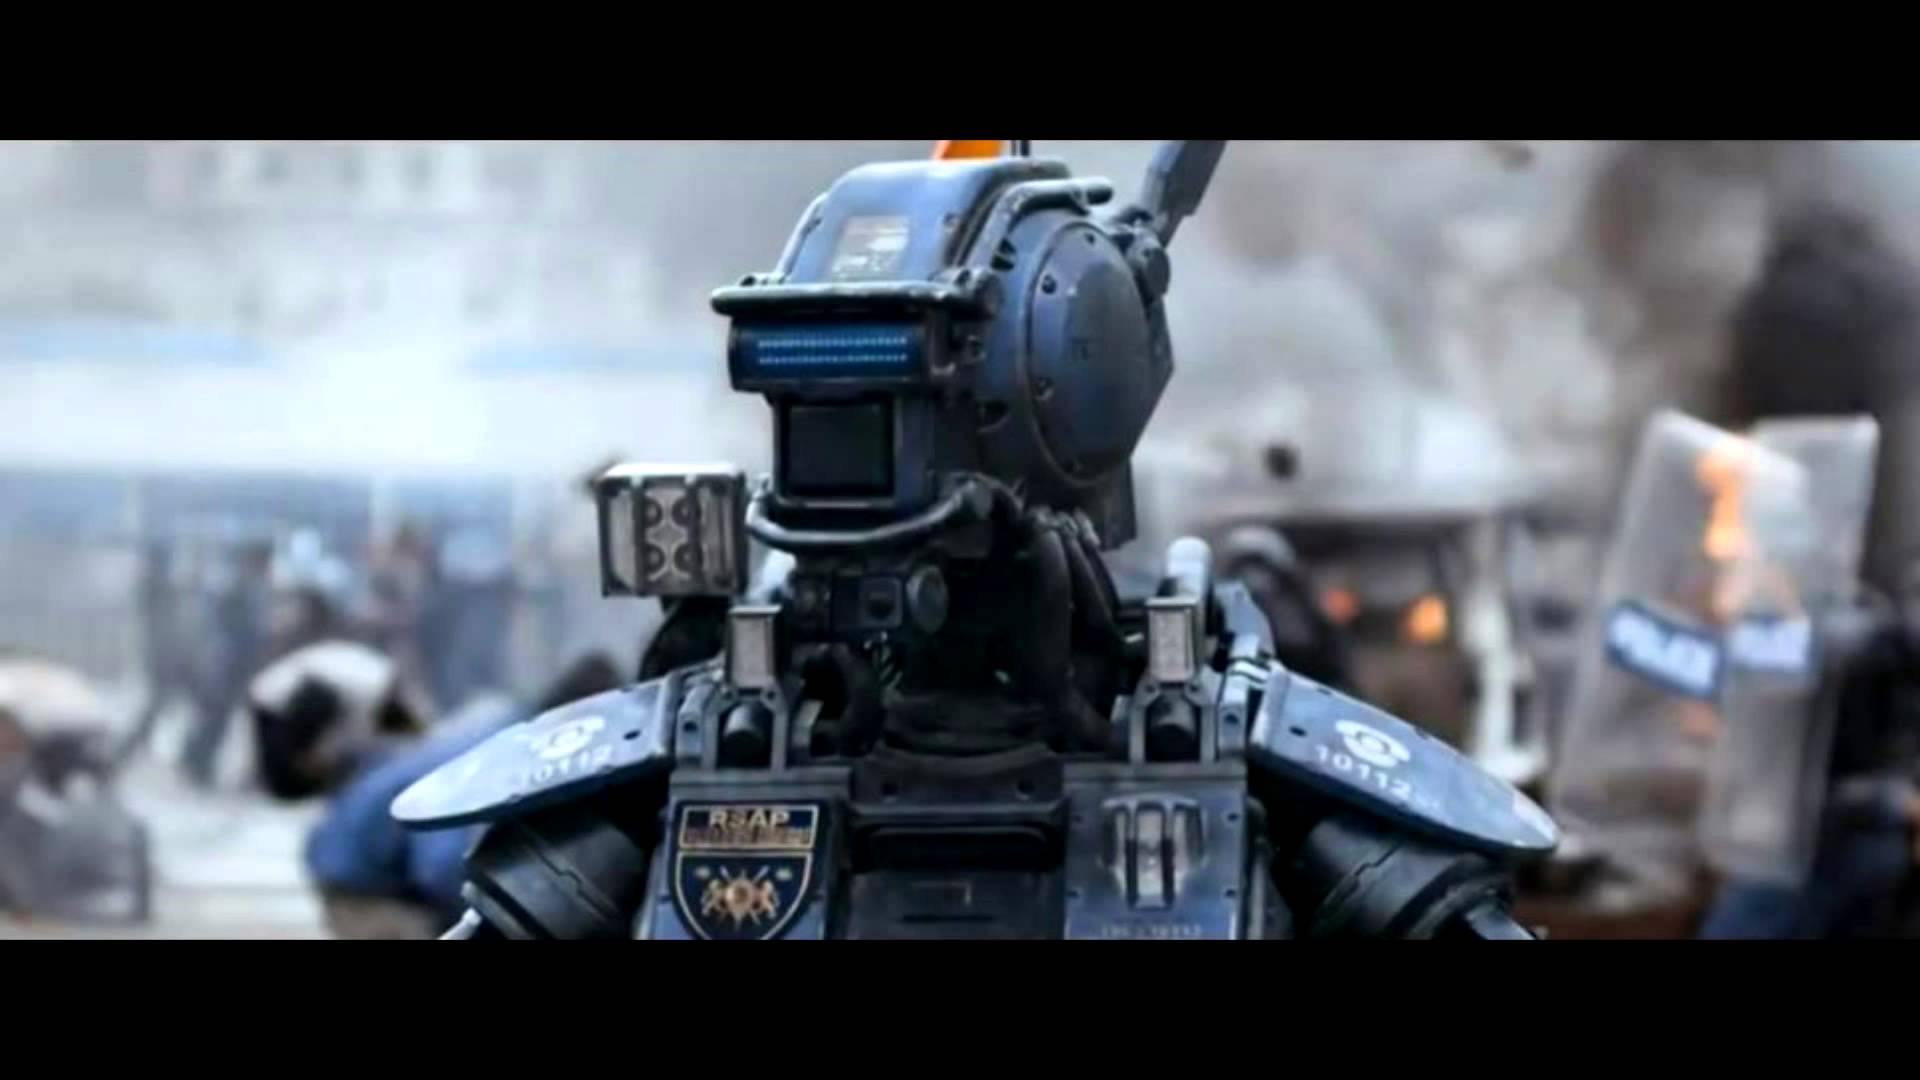 Chappie Wallpapers High Quality Download Free HD Wallpapers Download Free Images Wallpaper [wallpaper981.blogspot.com]